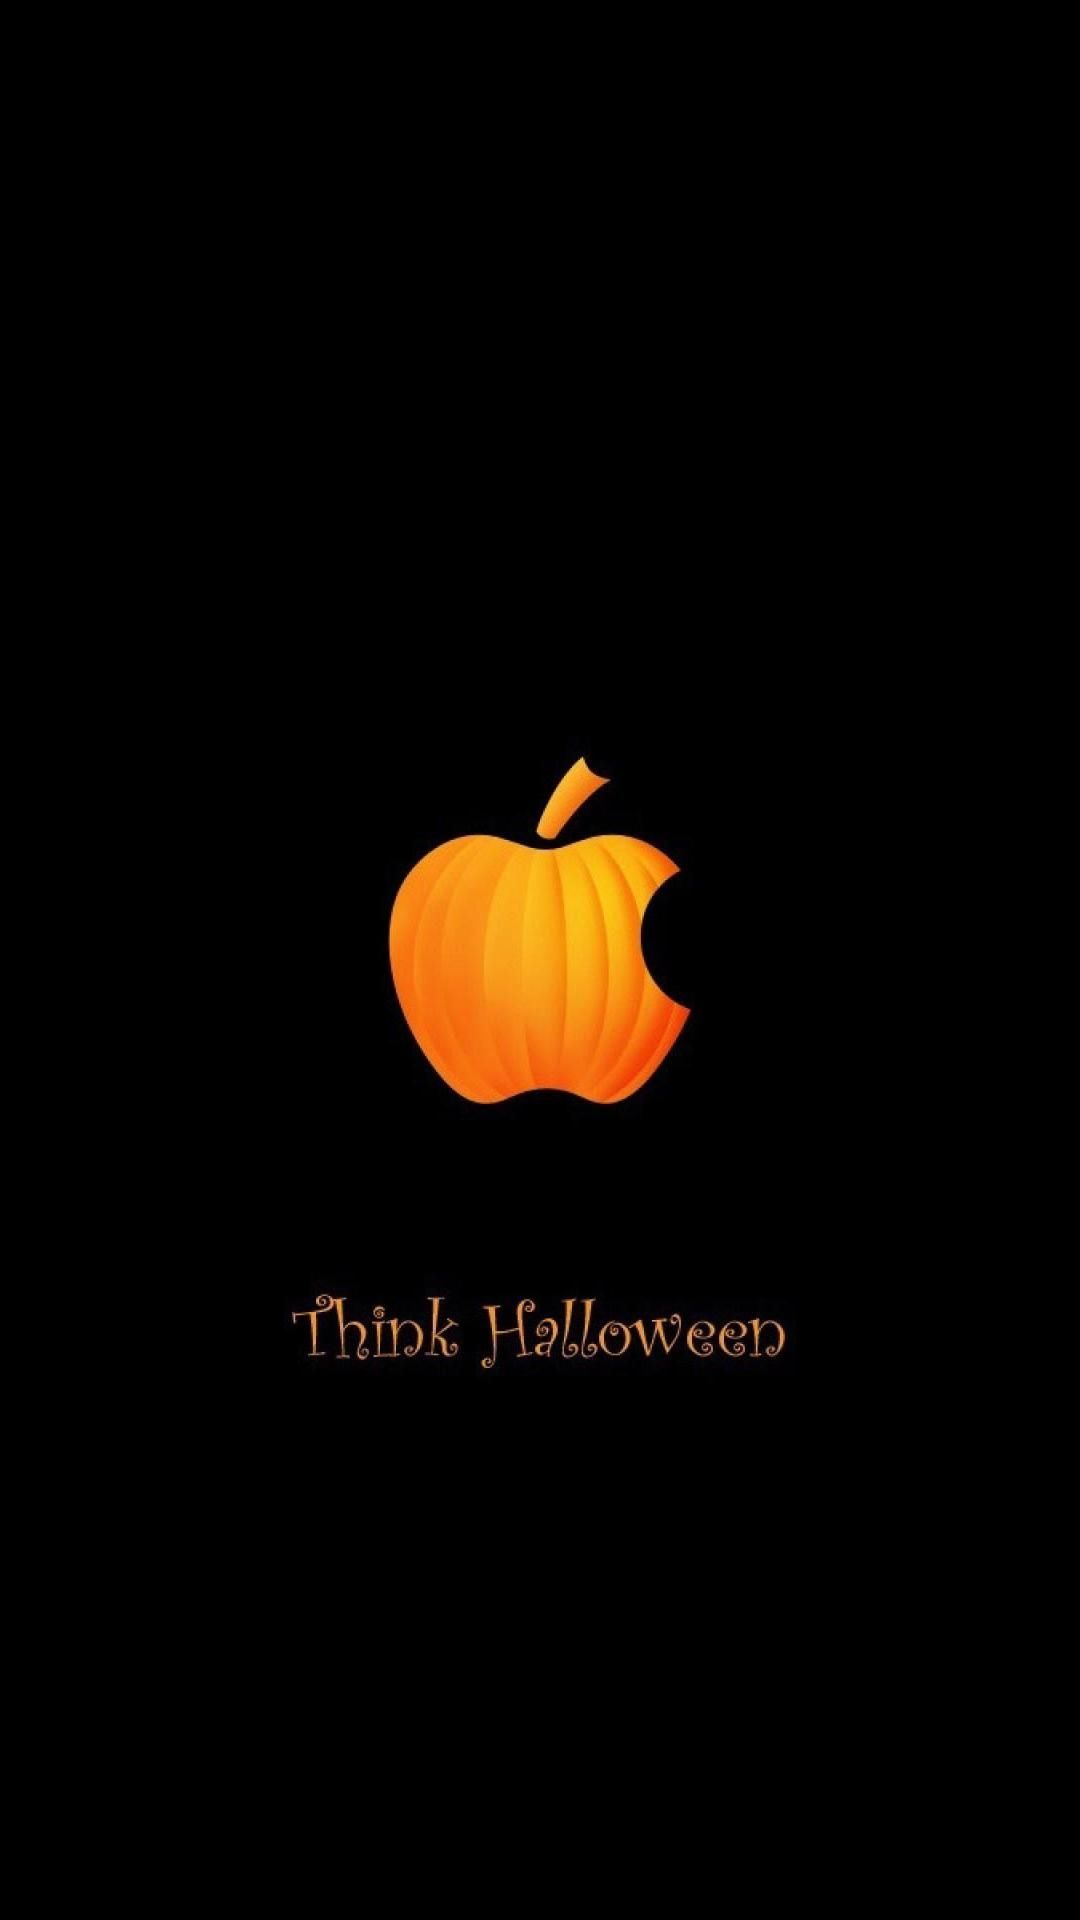 Apple inc halloween black funny Download Free HD+ Wallpaper for iPhone 6s, 7s, 8s, 10